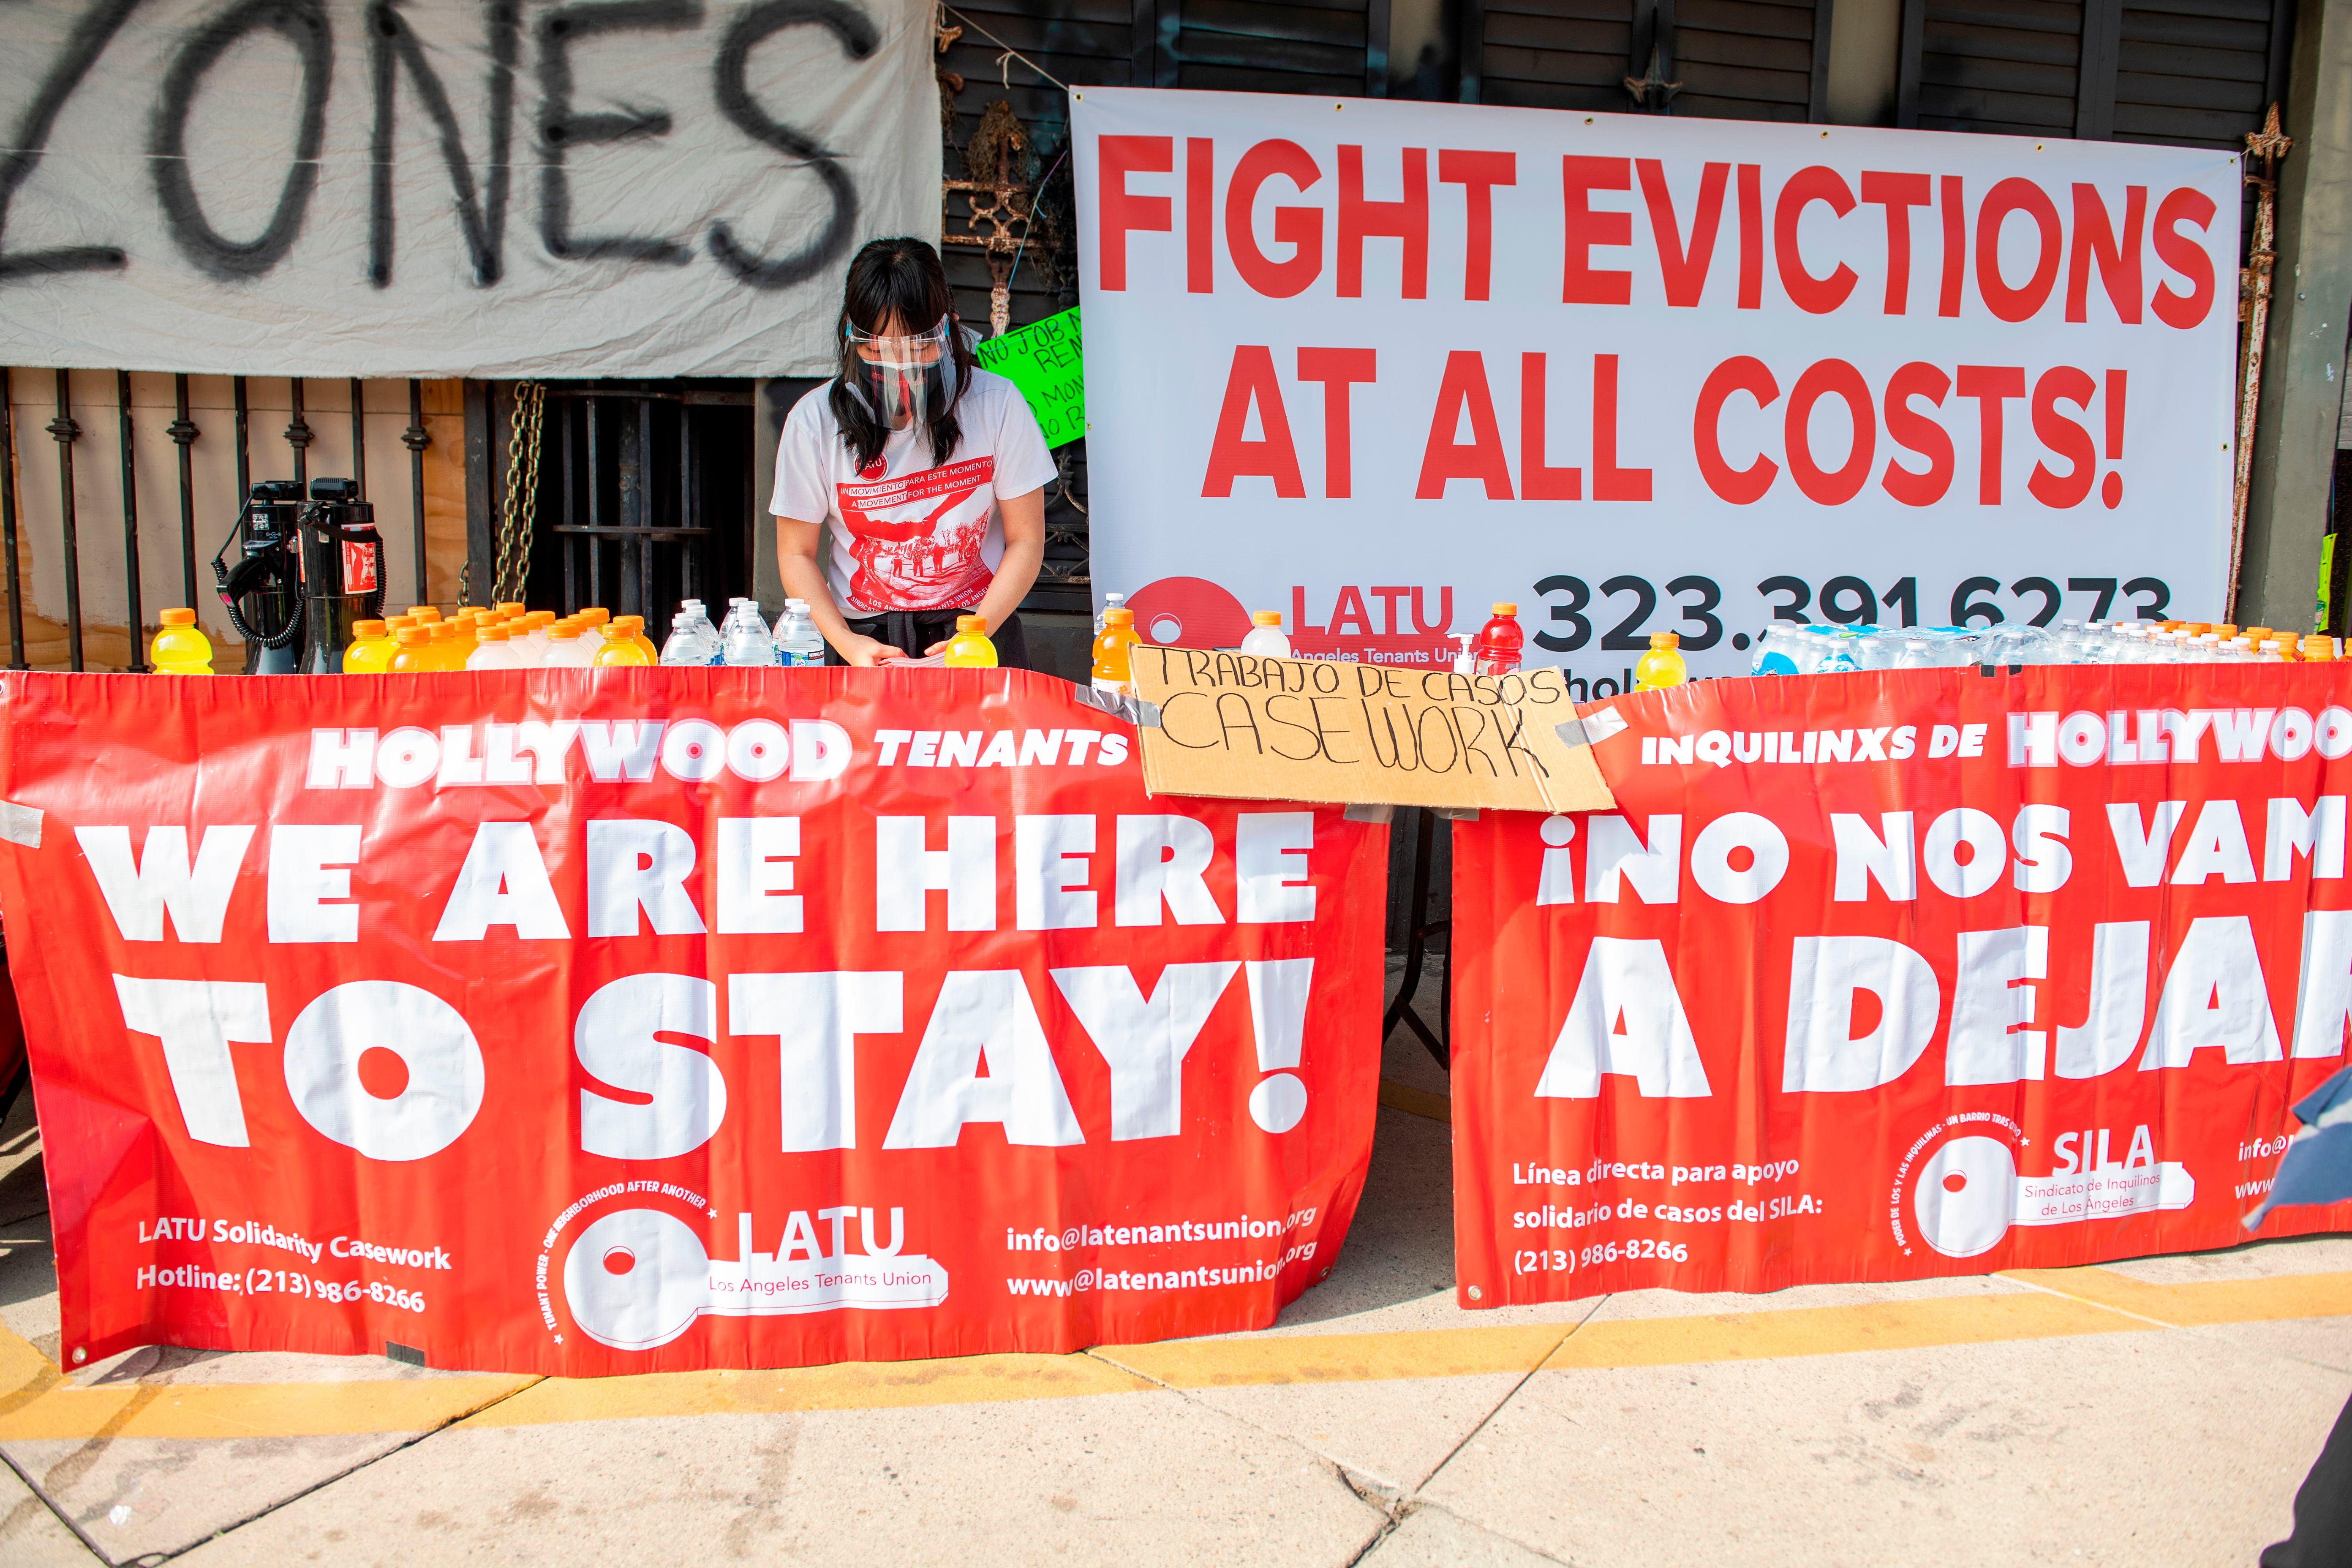 Members of the Los Angeles Tenants Union protest against evictions and give out food for the homeless on February 8, 2021 in Hollywood, California.